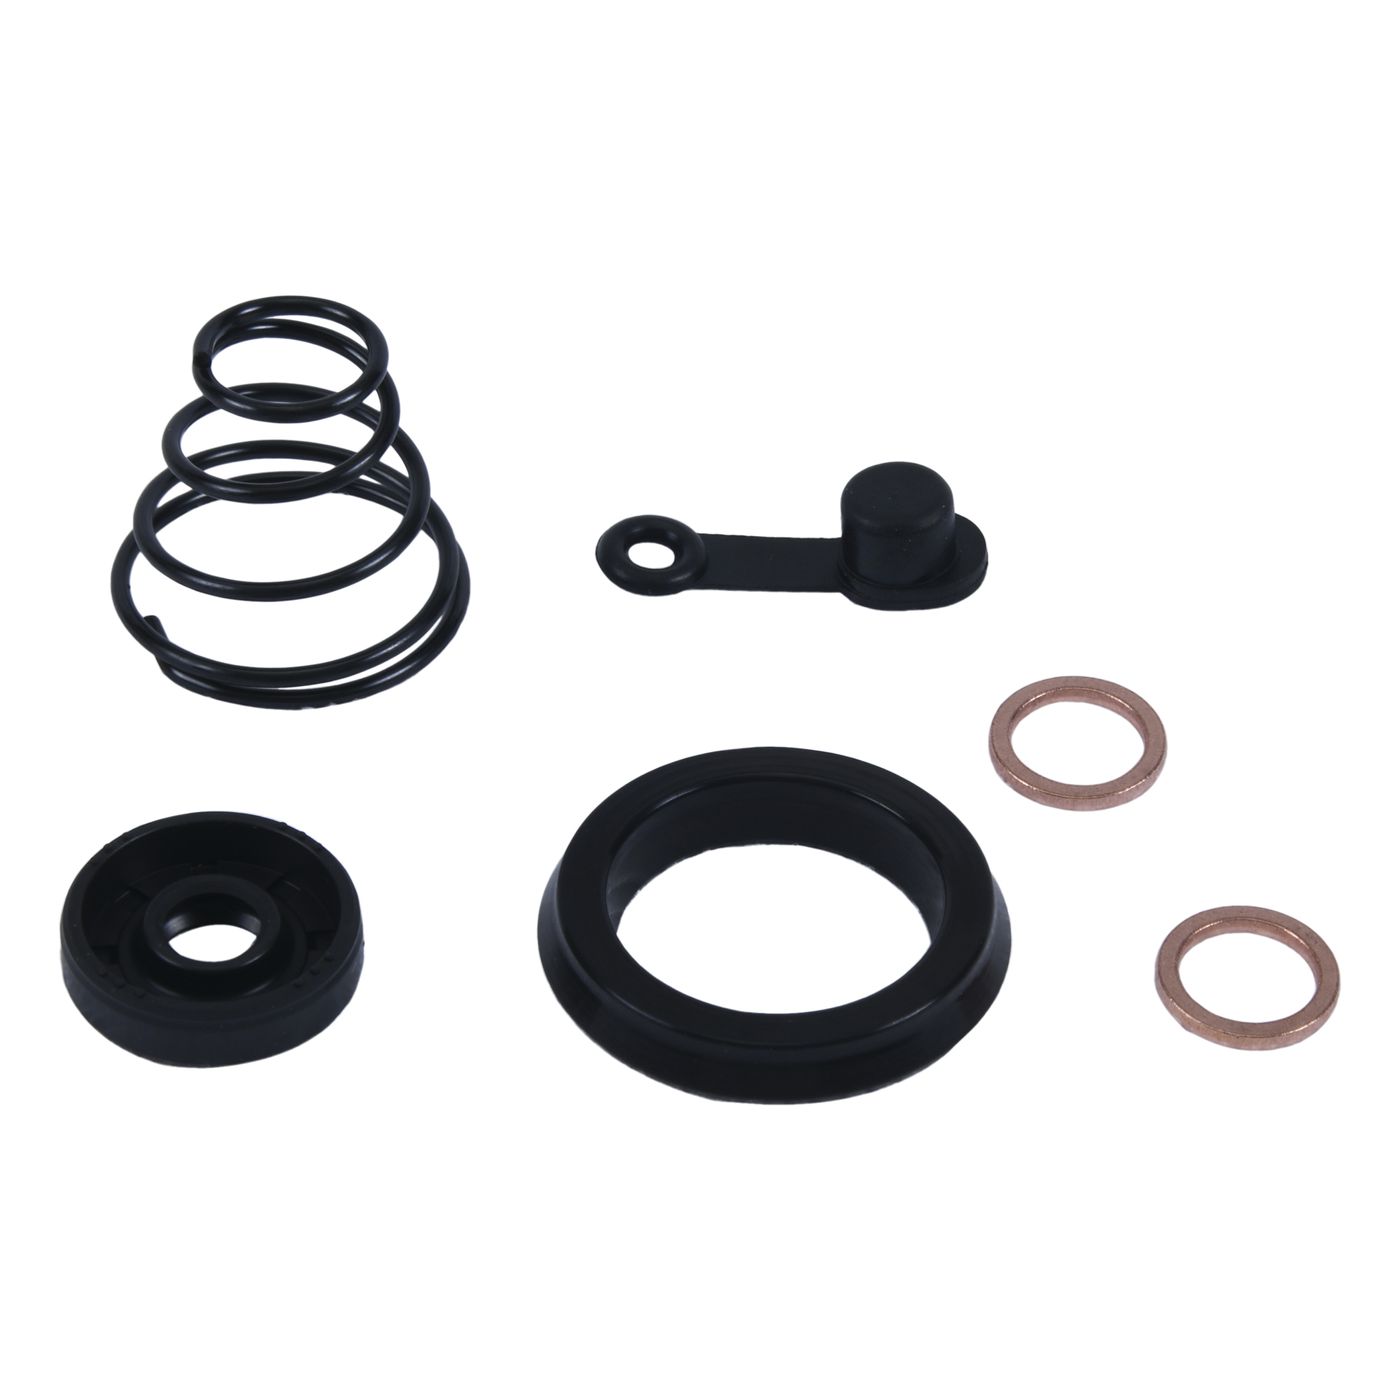 Wrp Clutch Slave Cylinder Kits - WRP186036 image